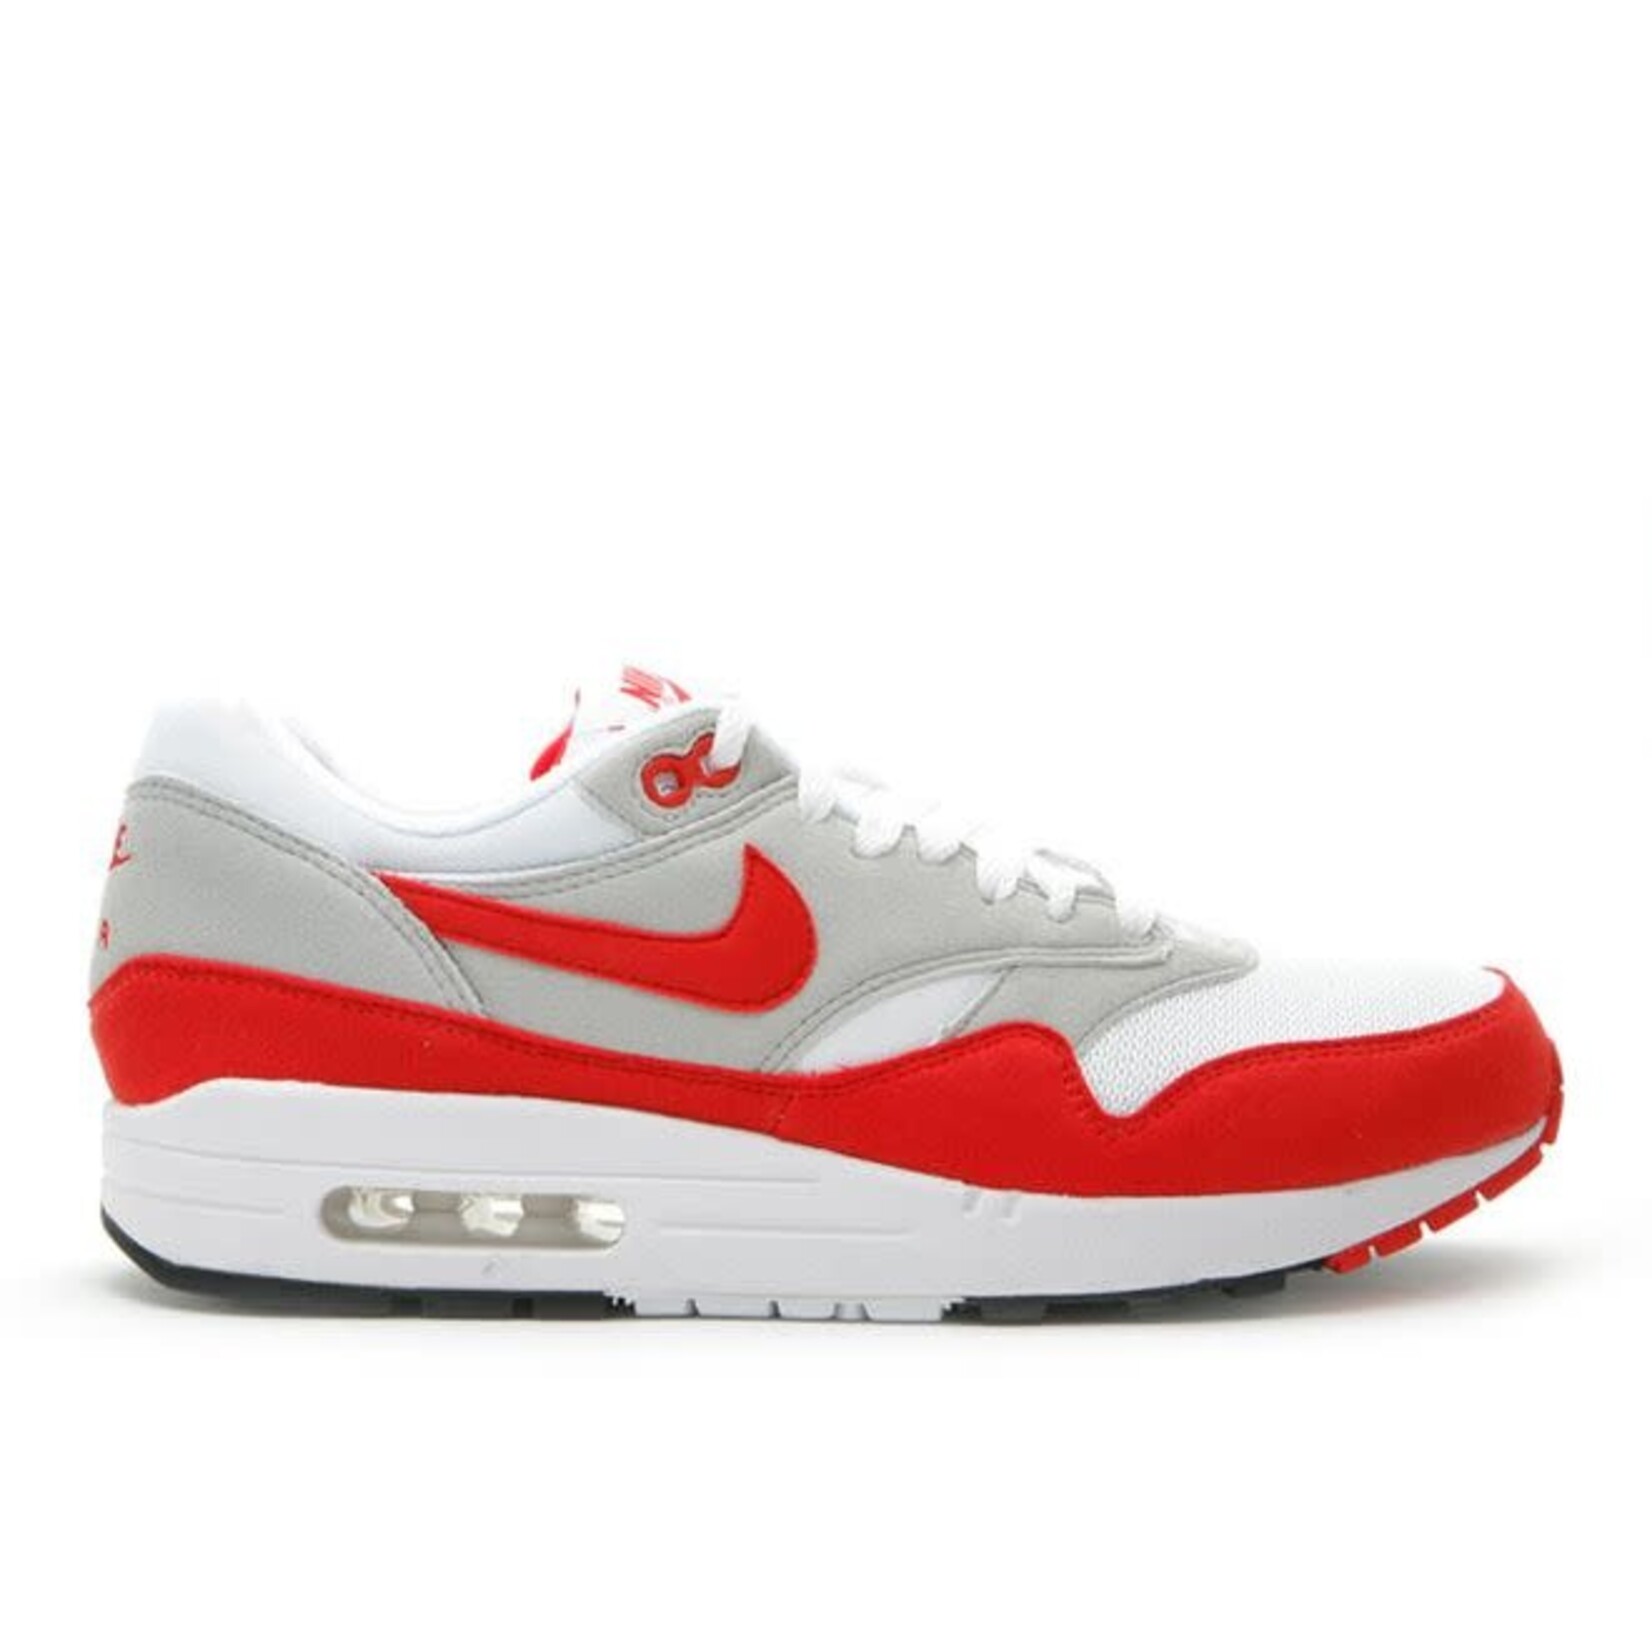 Nike Nike Air Max 1 Sport Red (2009) Size 7.5, DS BRAND NEW